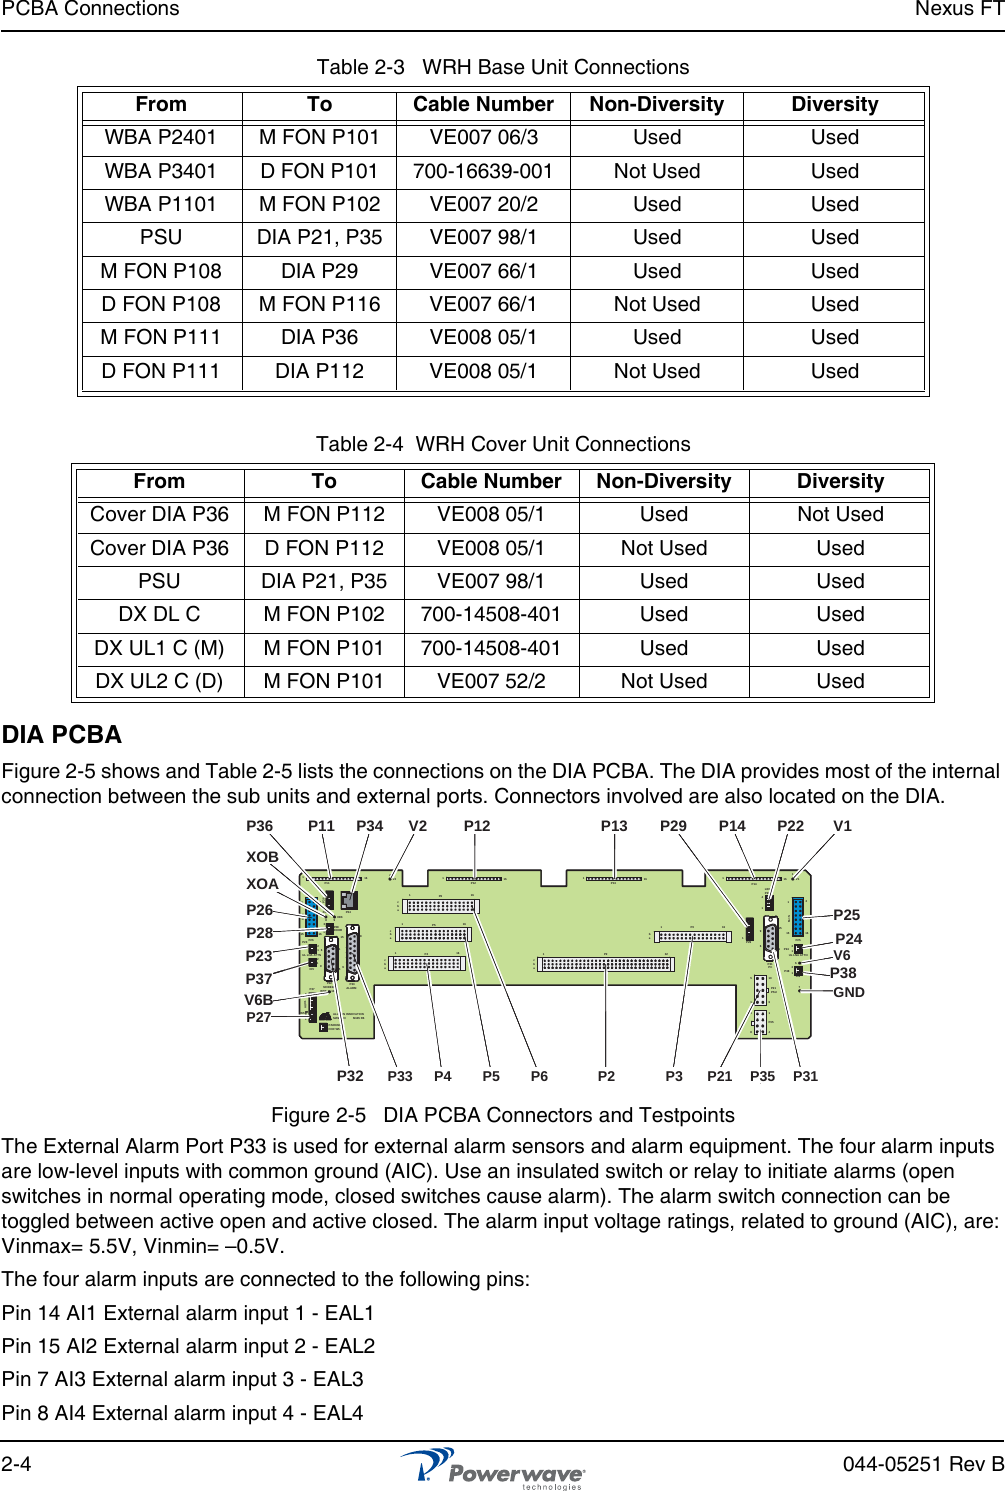 PCBA Connections Nexus FT2-4 044-05251 Rev BTable 2-3   WRH Base Unit ConnectionsTable 2-4  WRH Cover Unit ConnectionsDIA PCBAFigure 2-5 shows and Table 2-5 lists the connections on the DIA PCBA. The DIA provides most of the internal connection between the sub units and external ports. Connectors involved are also located on the DIA. Figure 2-5   DIA PCBA Connectors and TestpointsThe External Alarm Port P33 is used for external alarm sensors and alarm equipment. The four alarm inputs are low-level inputs with common ground (AIC). Use an insulated switch or relay to initiate alarms (open switches in normal operating mode, closed switches cause alarm). The alarm switch connection can be toggled between active open and active closed. The alarm input voltage ratings, related to ground (AIC), are: Vinmax= 5.5V, Vinmin= –0.5V.The four alarm inputs are connected to the following pins:Pin 14 AI1 External alarm input 1 - EAL1Pin 15 AI2 External alarm input 2 - EAL2Pin 7 AI3 External alarm input 3 - EAL3Pin 8 AI4 External alarm input 4 - EAL4From To Cable Number Non-Diversity DiversityWBA P2401 M FON P101 VE007 06/3 Used UsedWBA P3401 D FON P101 700-16639-001 Not Used UsedWBA P1101 M FON P102 VE007 20/2 Used UsedPSU DIA P21, P35 VE007 98/1 Used UsedM FON P108 DIA P29 VE007 66/1 Used UsedD FON P108 M FON P116 VE007 66/1 Not Used UsedM FON P111 DIA P36 VE008 05/1 Used UsedD FON P111 DIA P112 VE008 05/1 Not Used UsedFrom To Cable Number Non-Diversity DiversityCover DIA P36 M FON P112 VE008 05/1 Used Not UsedCover DIA P36 D FON P112 VE008 05/1 Not Used UsedPSU DIA P21, P35 VE007 98/1 Used UsedDX DL C M FON P102 700-14508-401 Used UsedDX UL1 C (M) M FON P101 700-14508-401 Used UsedDX UL2 C (D) M FON P101 VE007 52/2 Not Used UsedALLGON INNOVATIONSWEDEN         M105 R61PARKINGFOR W5W58P27 W6B 101P33ALARMP23UL LNA ATT NP32MODEMAUX1P28DOOR596111611M-&gt;SP11P348915P2615 16S-&gt;M12389P365X0AX0B2V2 116P12 P13111161616P4P5P6cbacbacbacba1P2321ba116P316 116P141V111111461156915216124585P35P21PSU610P31PCP29P24P25GND76V6UL LNA ATTNLEDP2212V6BP26XOAXOBP28P4 P5 P6 P2 P3 P31 P21  P35 P33P32P11 P12 P13 V1P14 P22P29P34 V2P36V6GNDP25P24P27P2312P37DIV 12P38DIVP38ALLGON INNOVATIONSWEDEN         M105 R61PARKINGFOR W5W58P27 W6B 101P33ALARMP23UL LNA ATT NP32MODEMAUX1P28DOOR596111611M-&gt;SP11P348915P2615 16S-&gt;M12389P365X0AX0B2V2 116P12 P13111161616P4P5P6cbacbacbacba1P2321ba116P316 116P141V111111461156915216124585P35P21PSU610P31PCP29P24P25GND76V6UL LNA ATTNLEDP2212V6BP26XOAXOBP28P4 P5 P6 P2 P3 P31 P21  P35 P33P32P11 P12 P13 V1P14 P22P29P34 V2P36V6GNDP25P24P27P2312P37DIV 12P38DIVP38